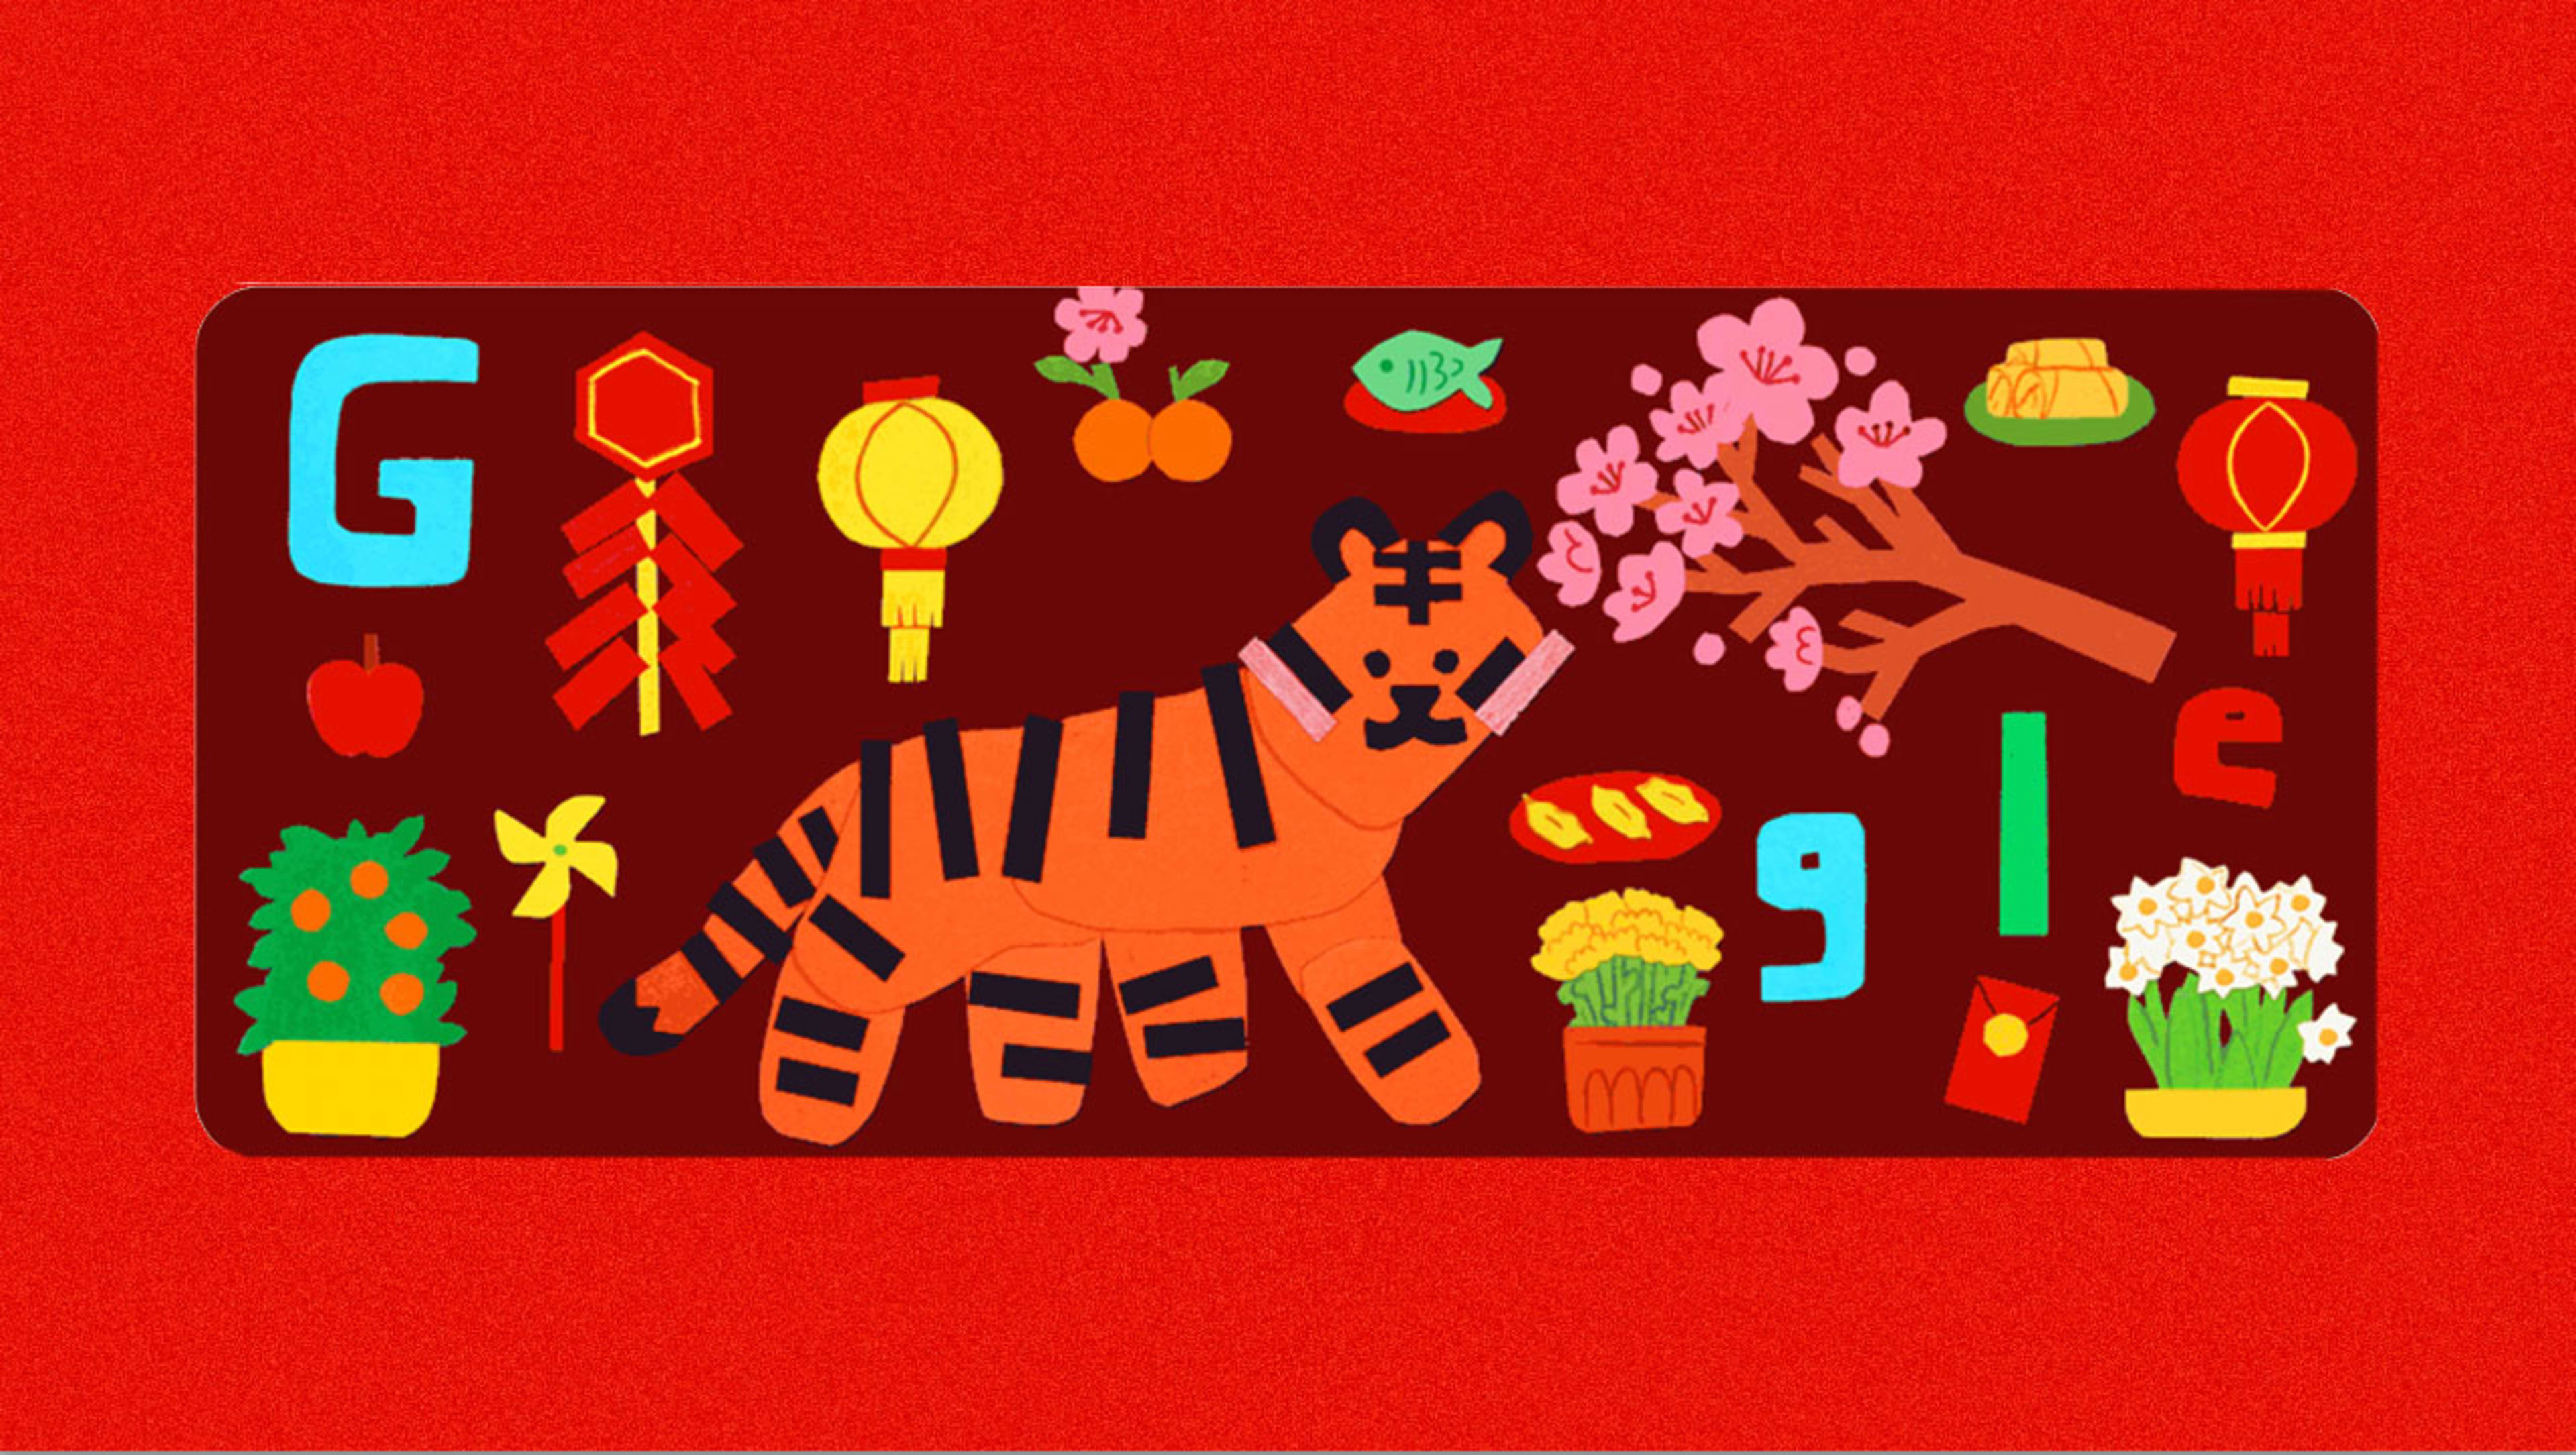 Happy Lunar New Year: Here’s the cultural meaning behind Google’s Year of the Tiger doodle